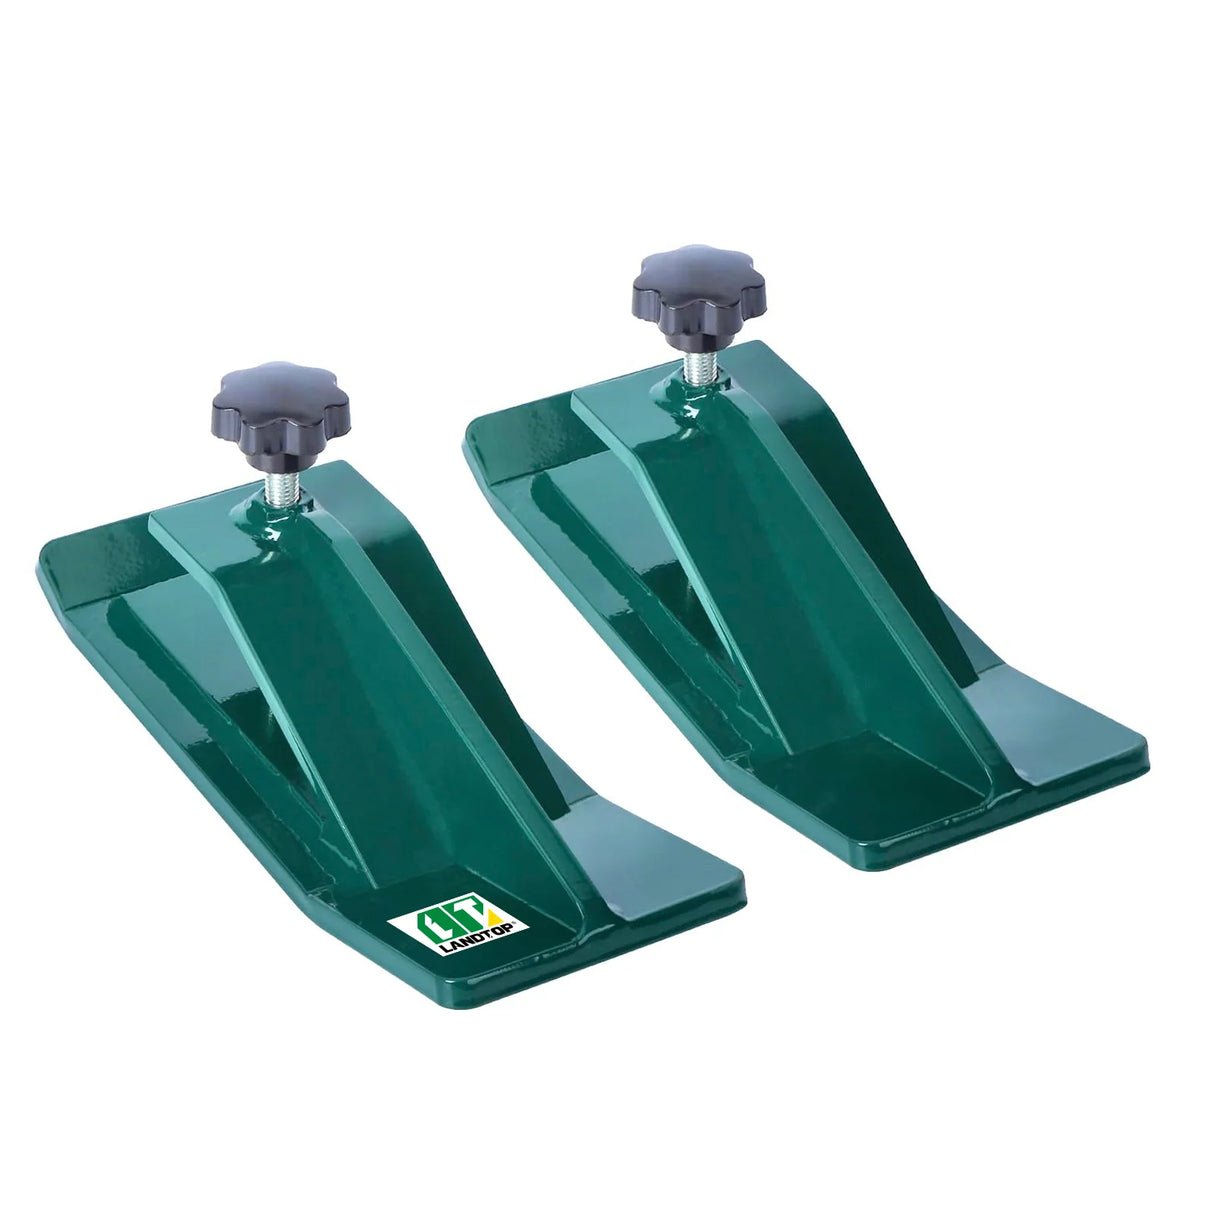 Tractor Bucket Protector, 2pcs Ski Edge Protector, Turf Tamer Skid Protector, Heavy Duty Steel Bucket Edge Anti-Skid Device, Bucket Attachment for Snow Leaves Removal Spreading Gravel, Green